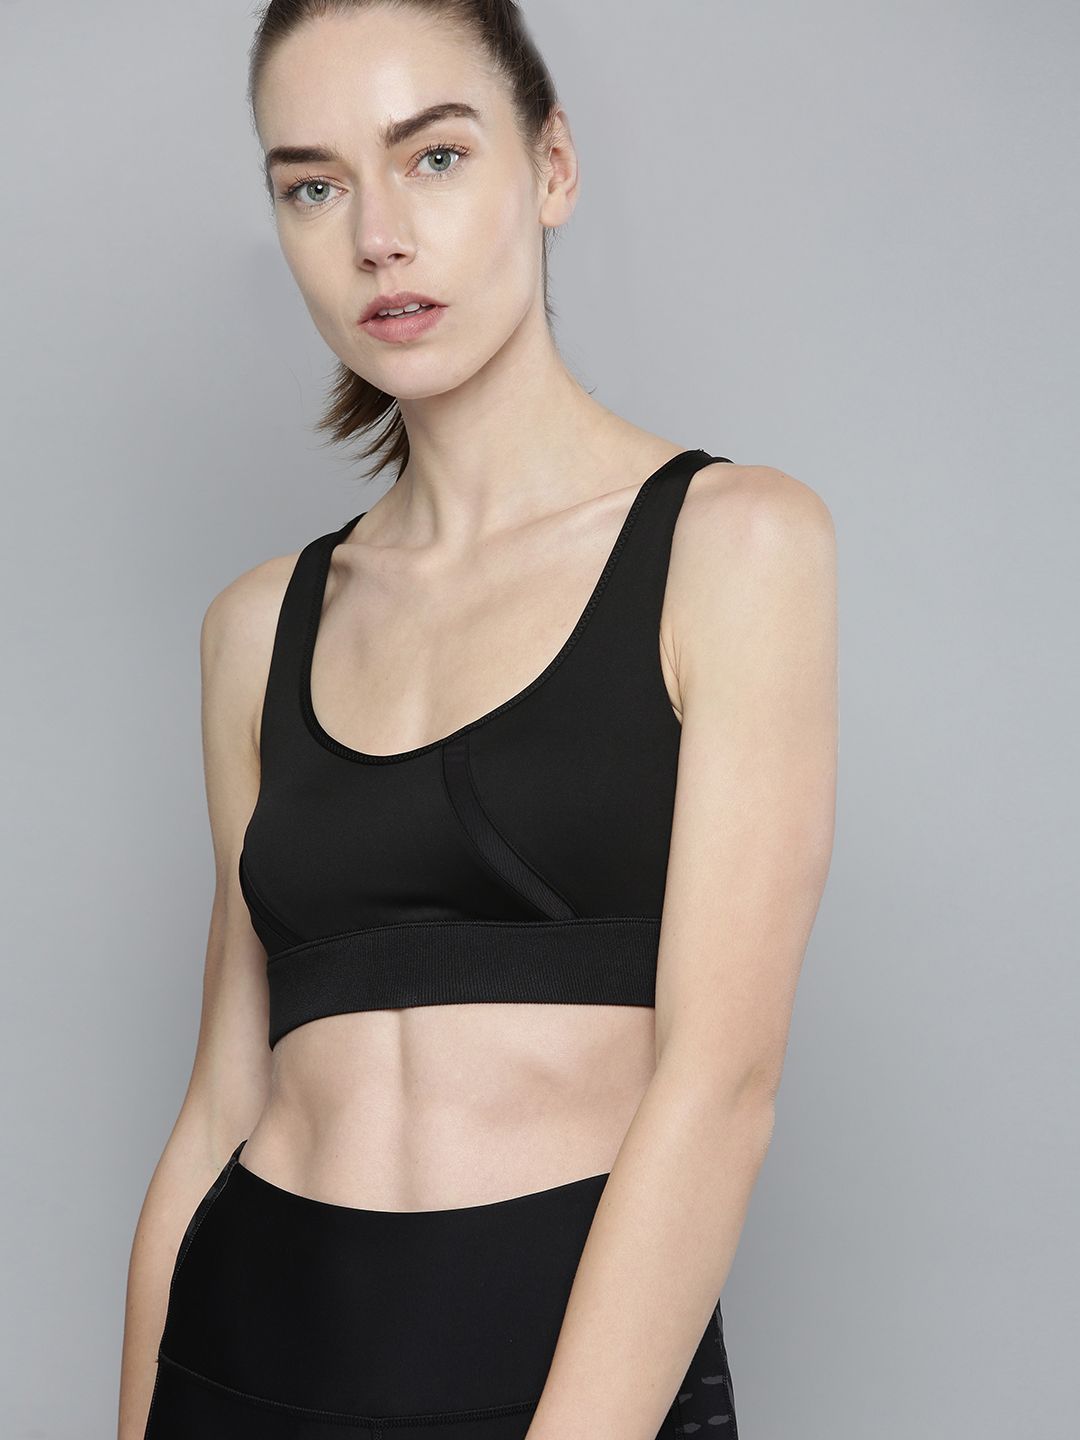 Puma Black Lightly Padded EXHALE Mesh Curve dryCELL Performance Sustainable Yoga Bra 52096601 Price in India